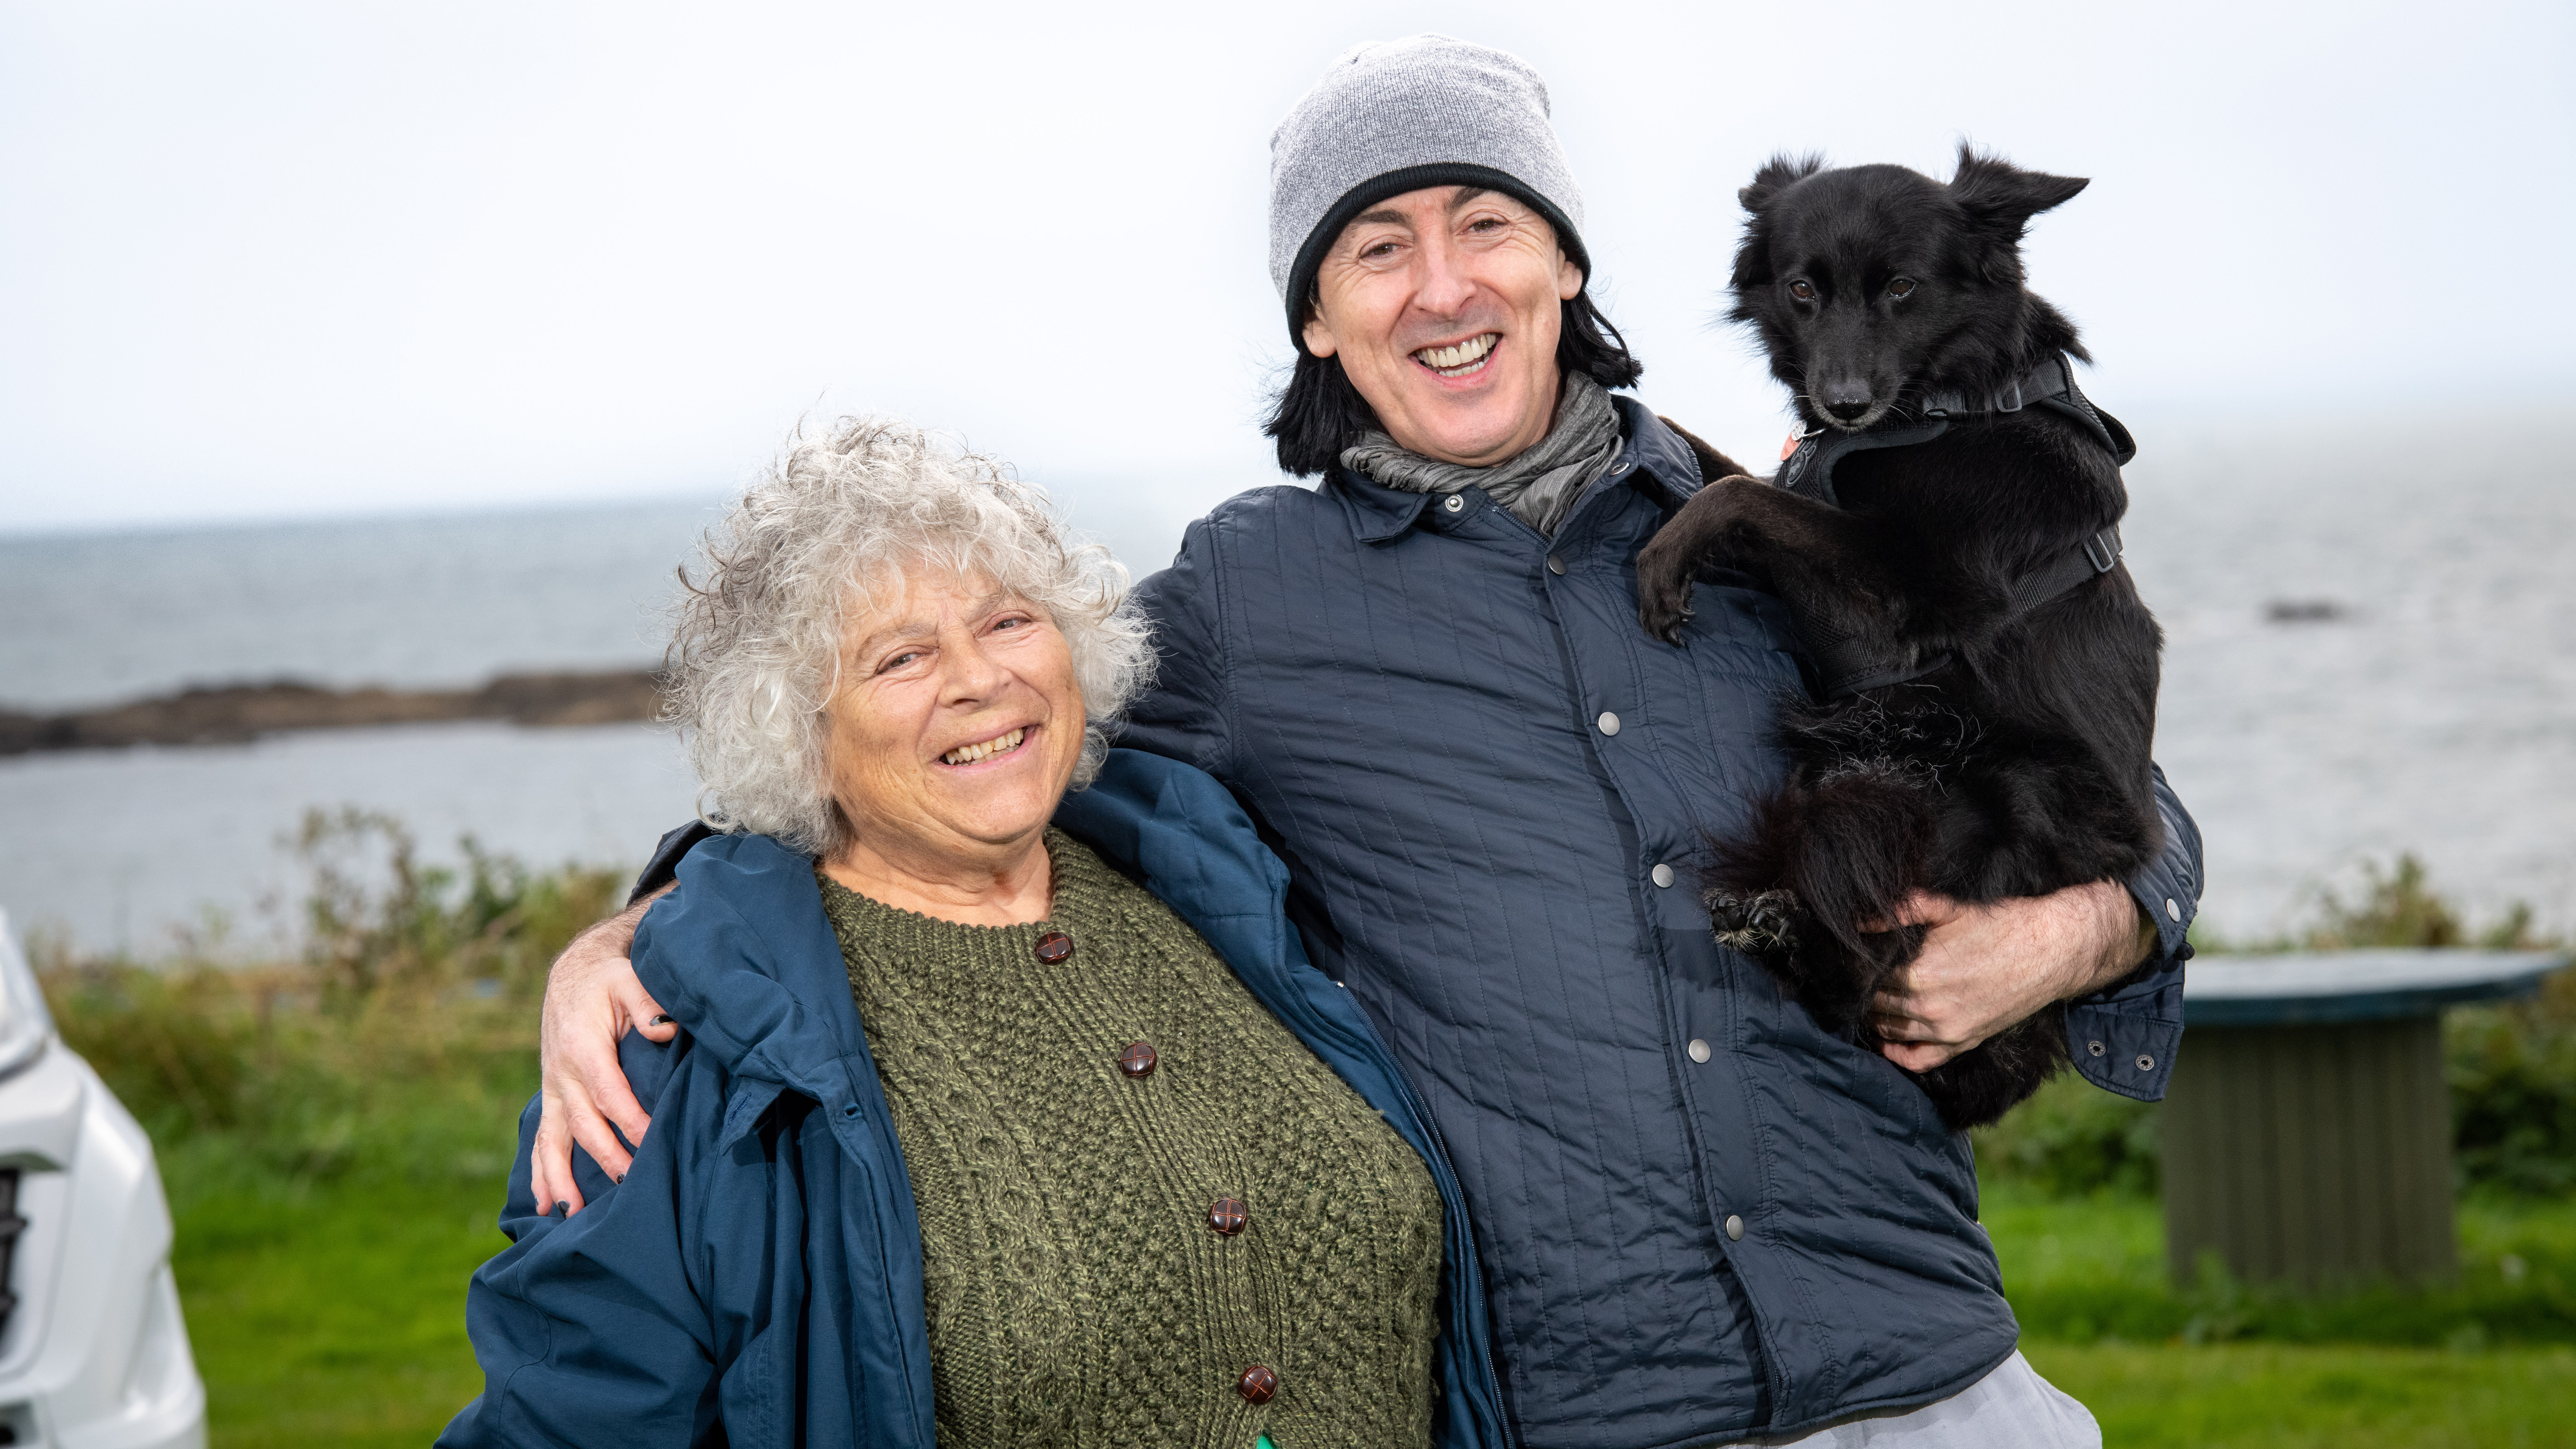 A year older, but not necessarily wiser, Miriam, Alan and Alan's dog go on another epic journey.